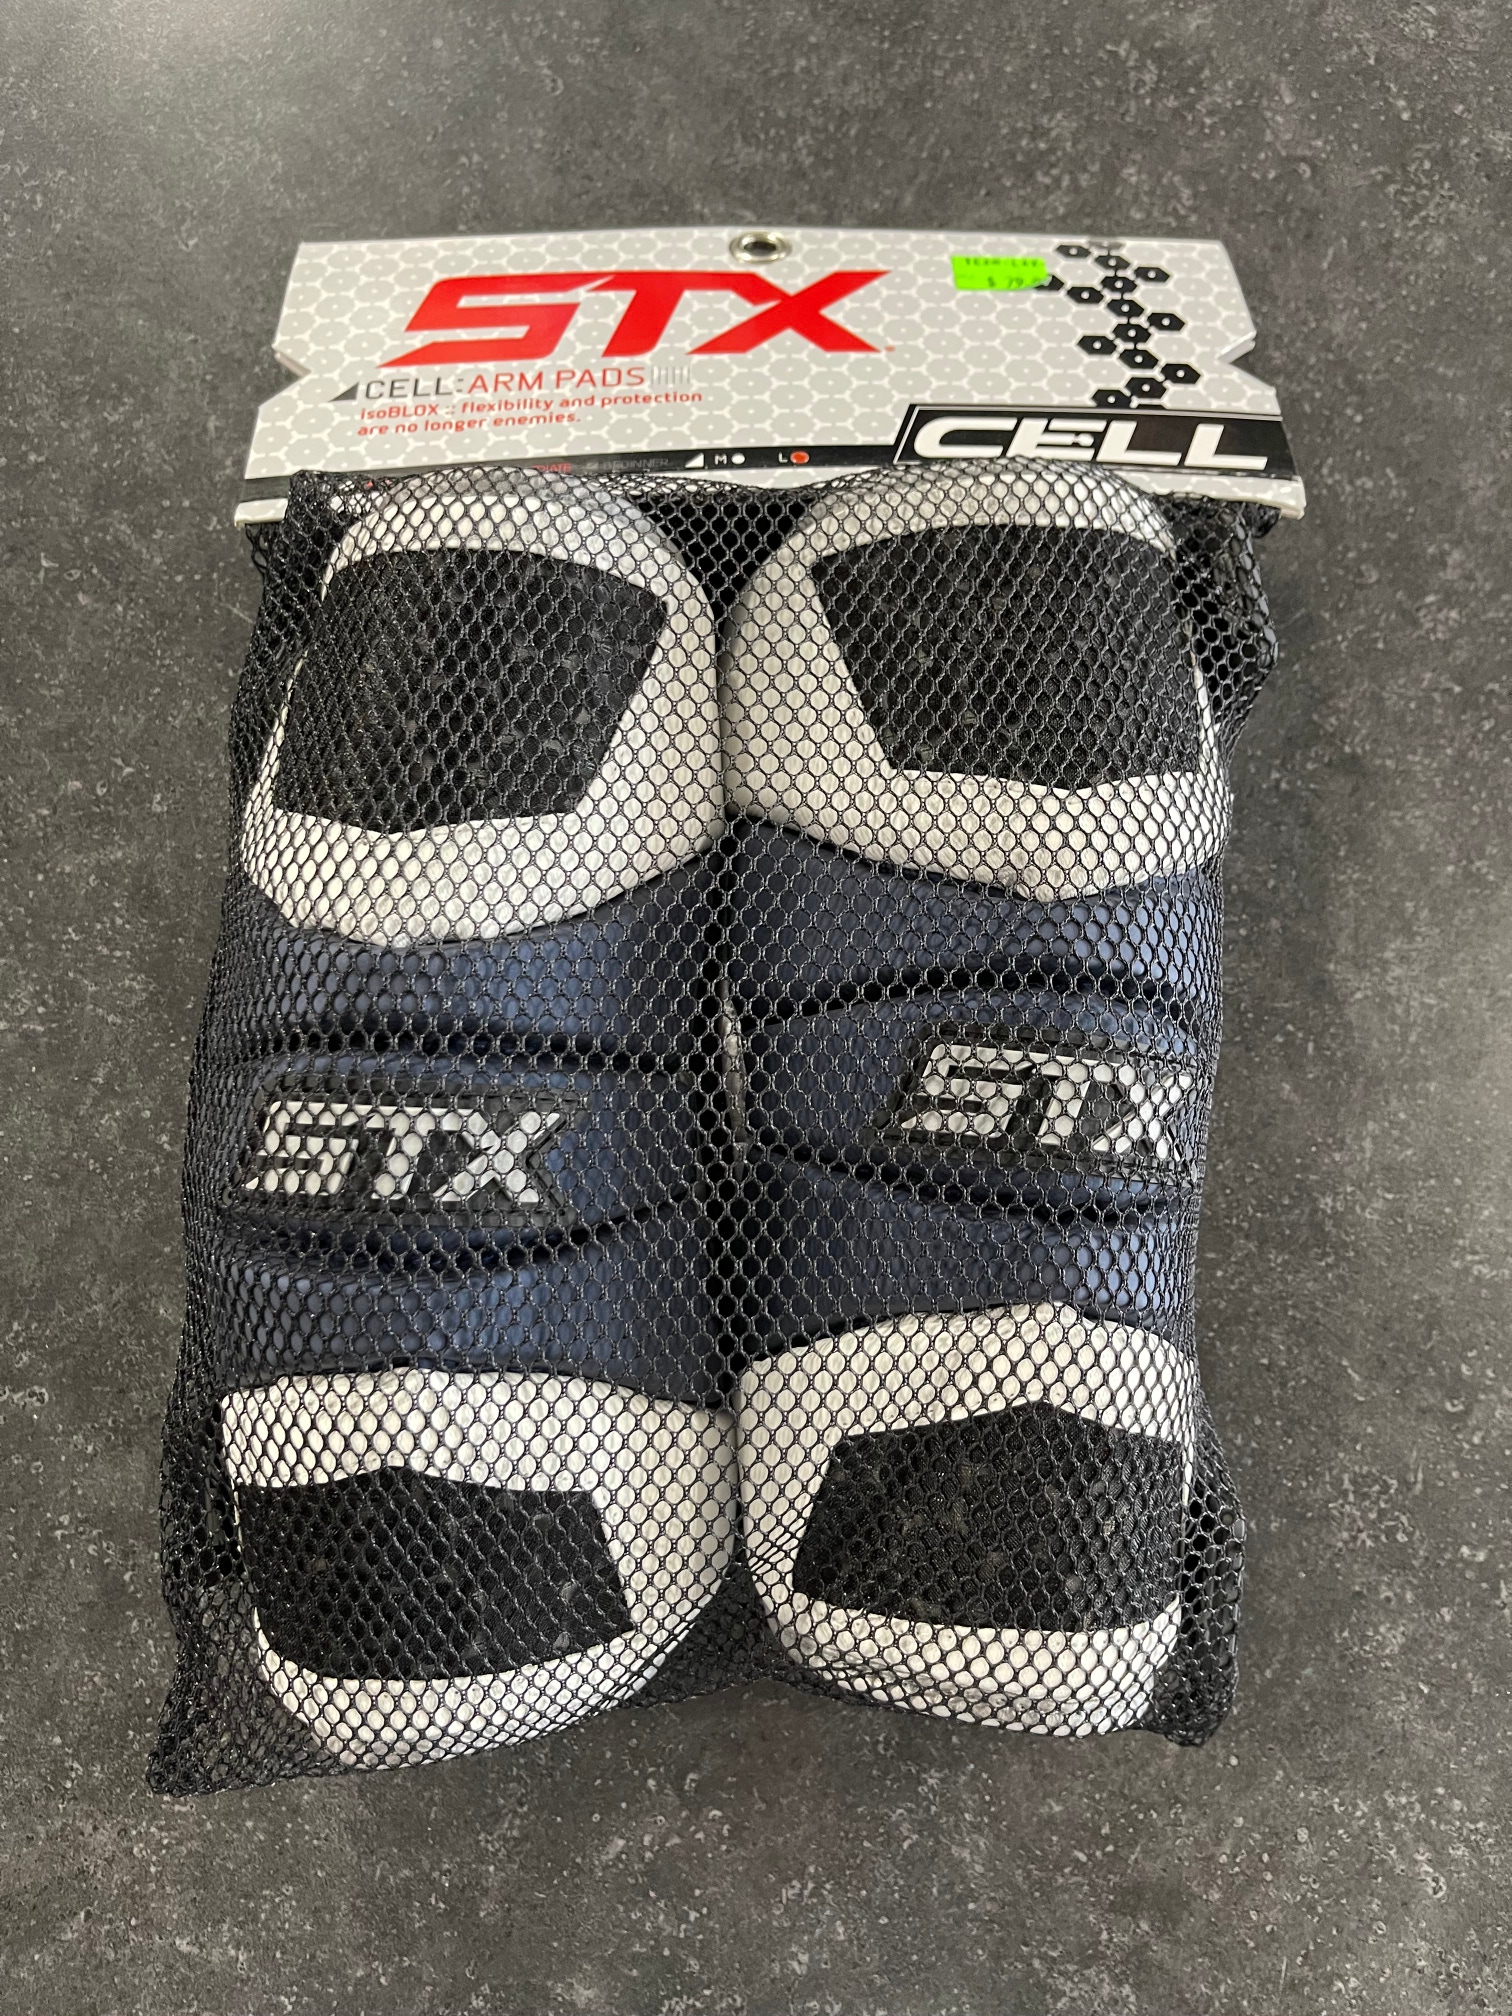 New Large STX Cell Arm Pads (Navy)